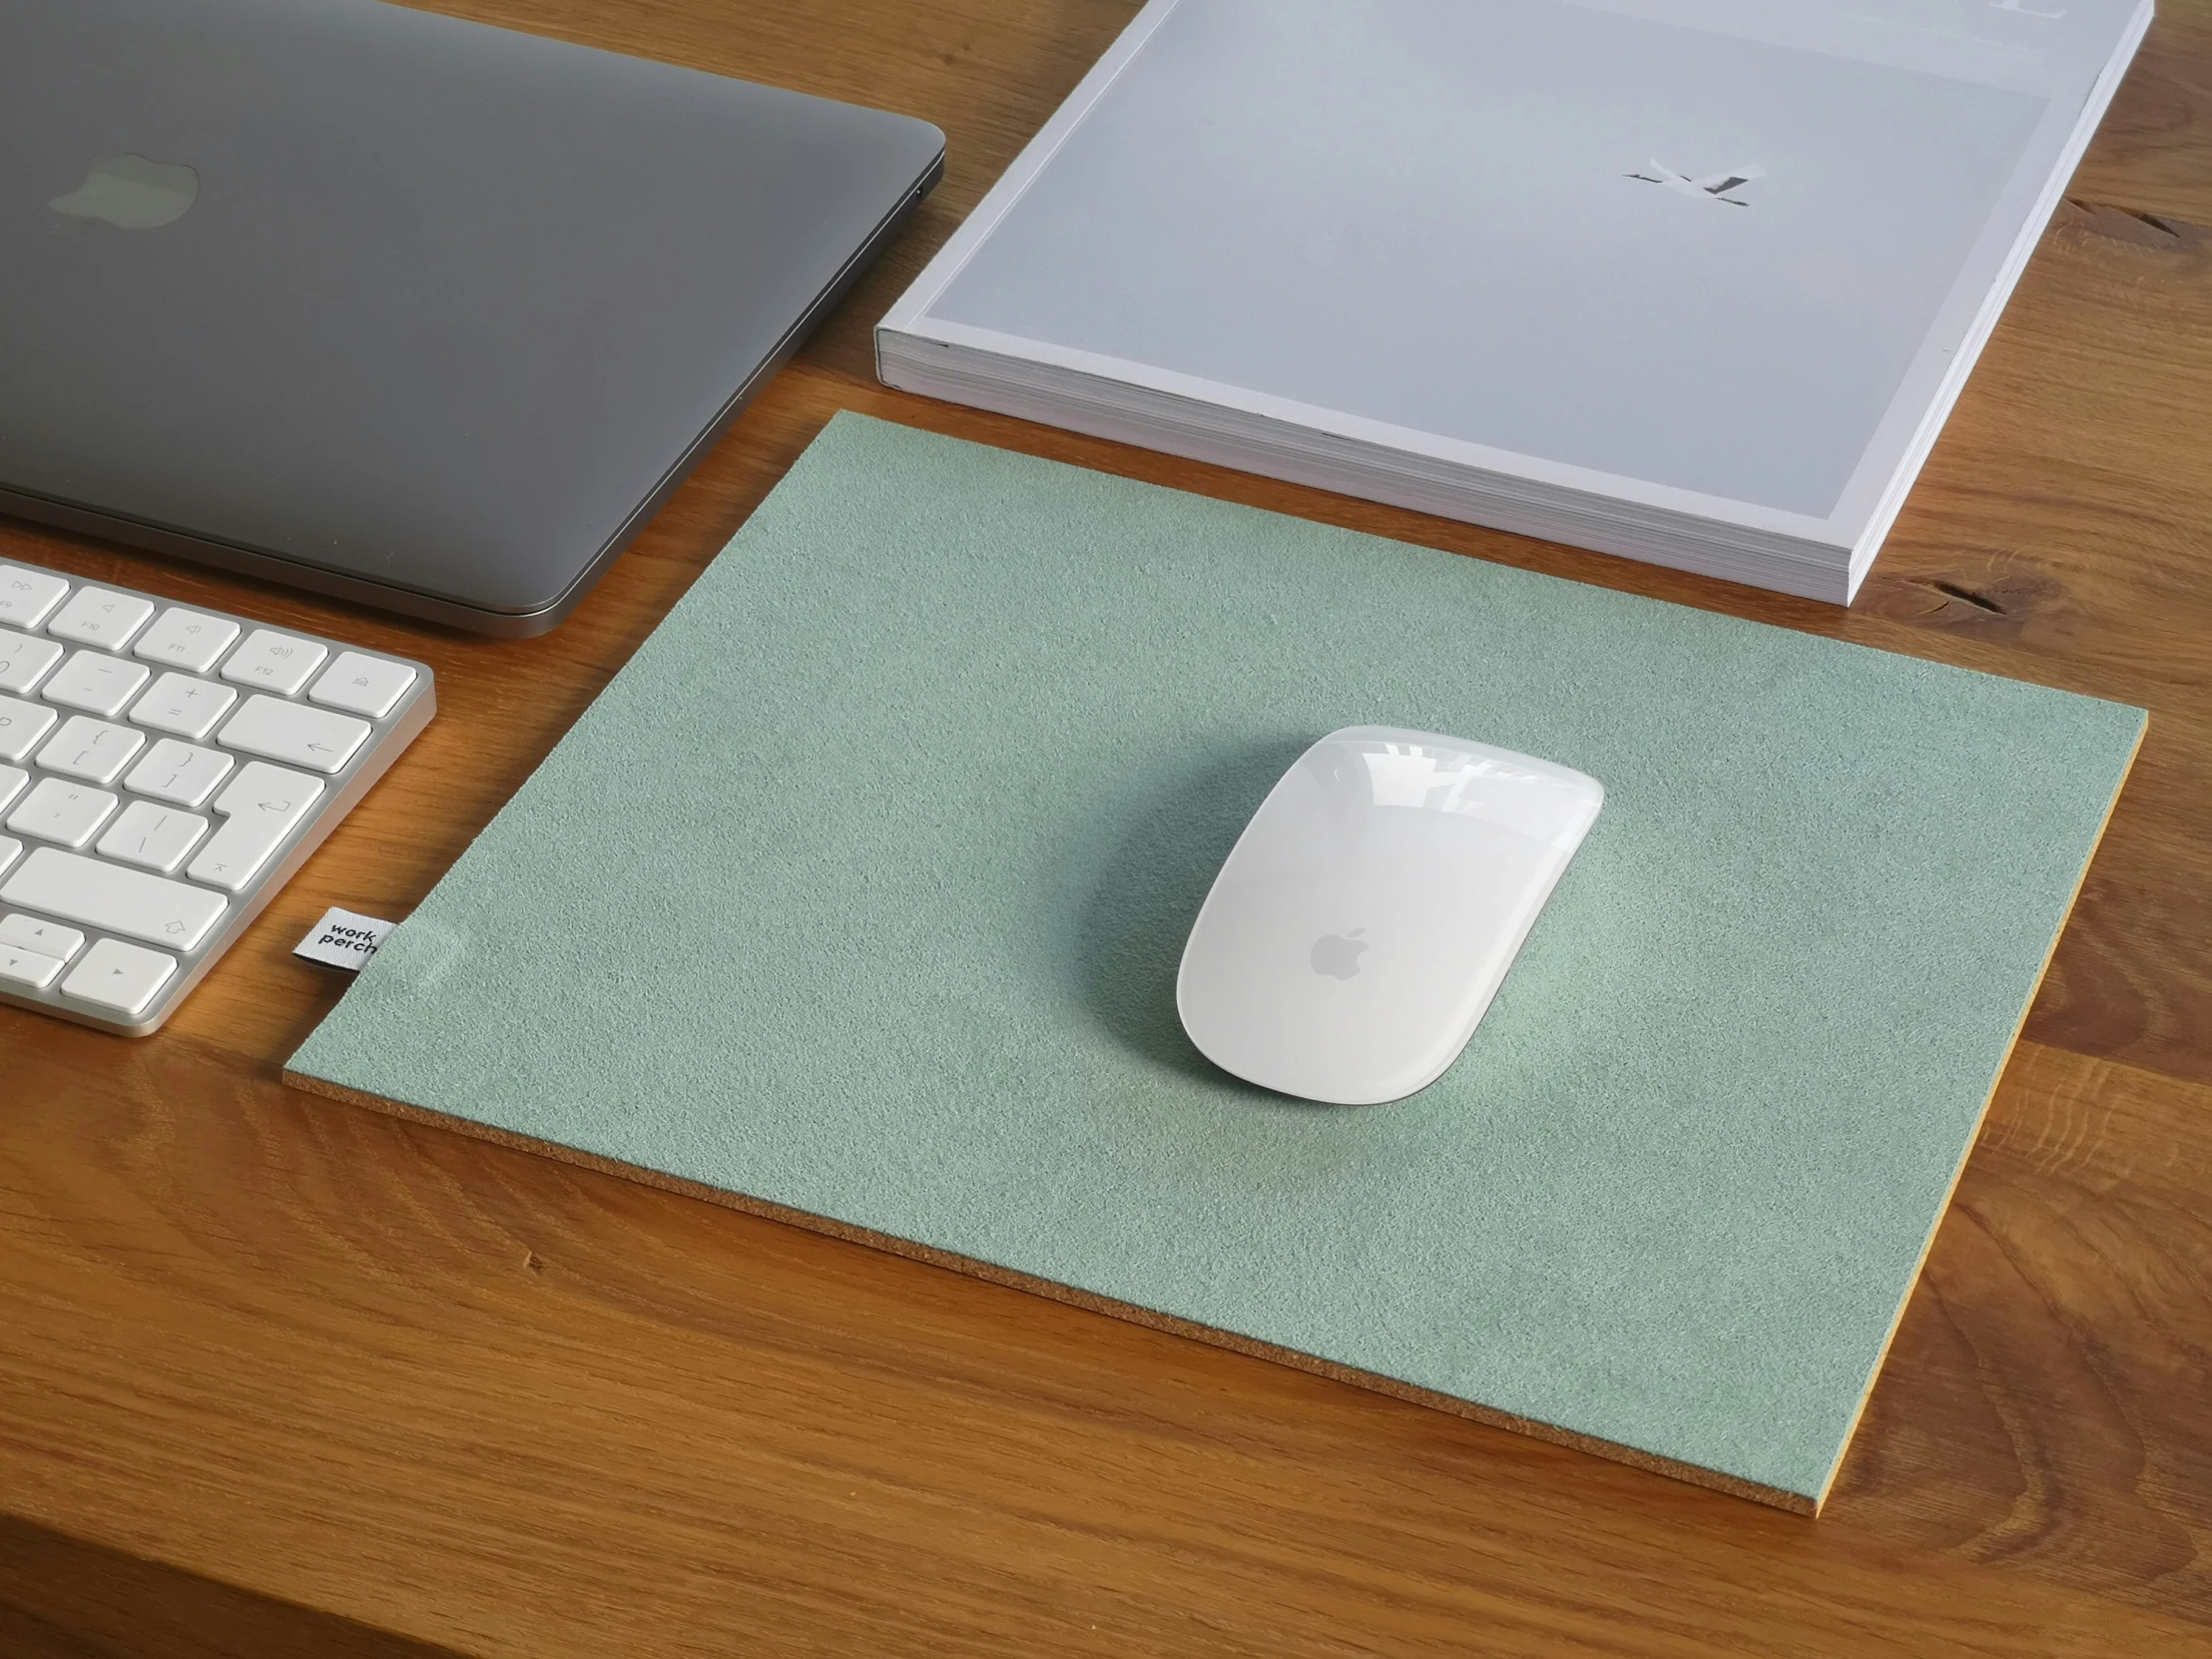 apple mouse and computer keyboard laid out on table